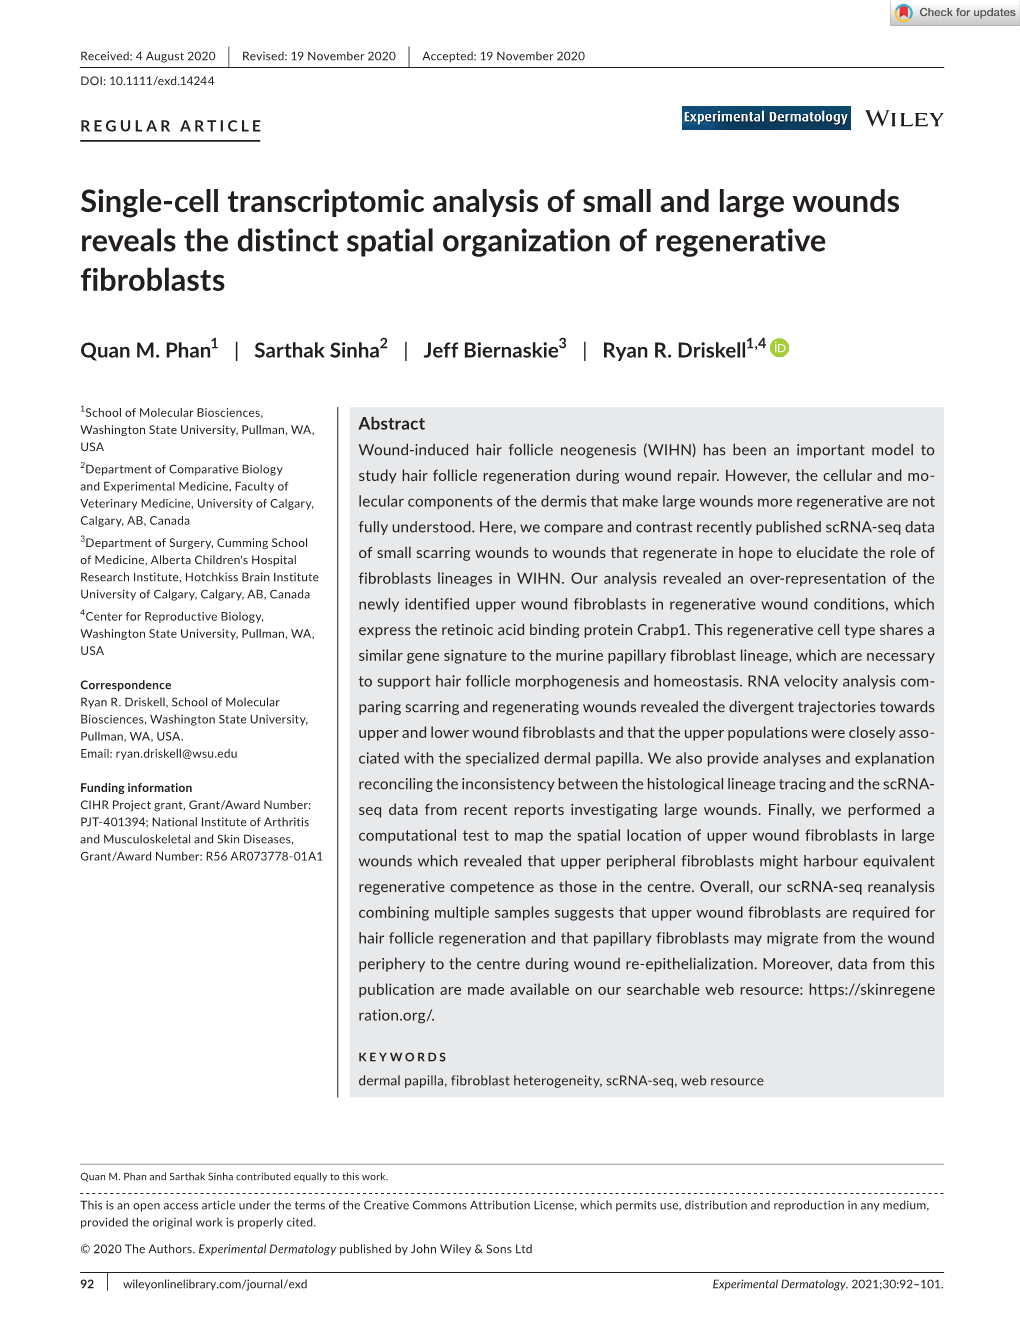 Single‐Cell Transcriptomic Analysis of Small and Large Wounds Reveals The